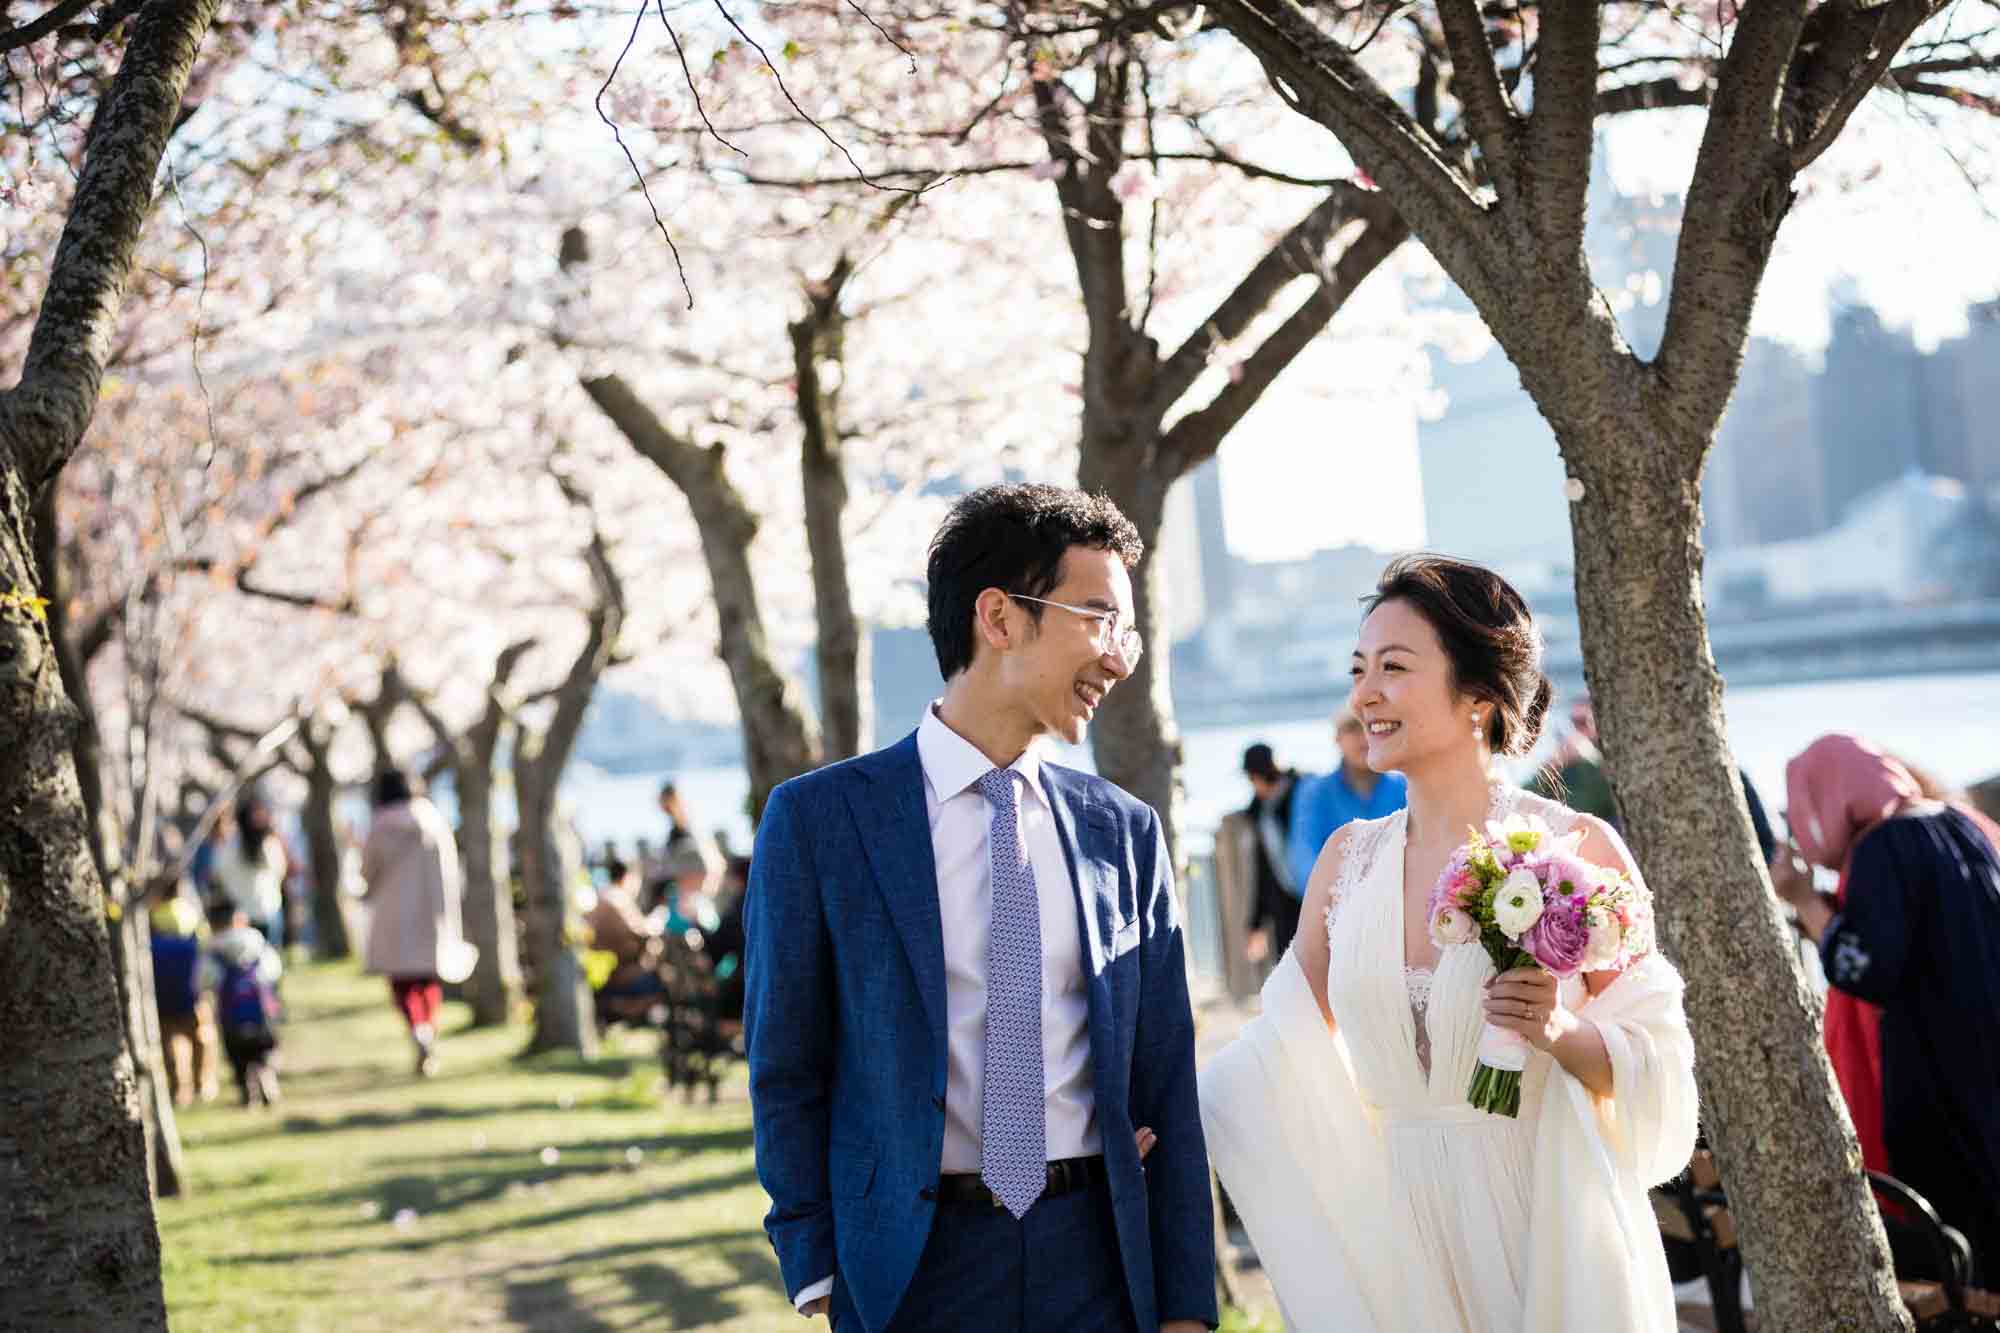 Couple walking under cherry blossom trees during a Roosevelt Island engagement photo shoot